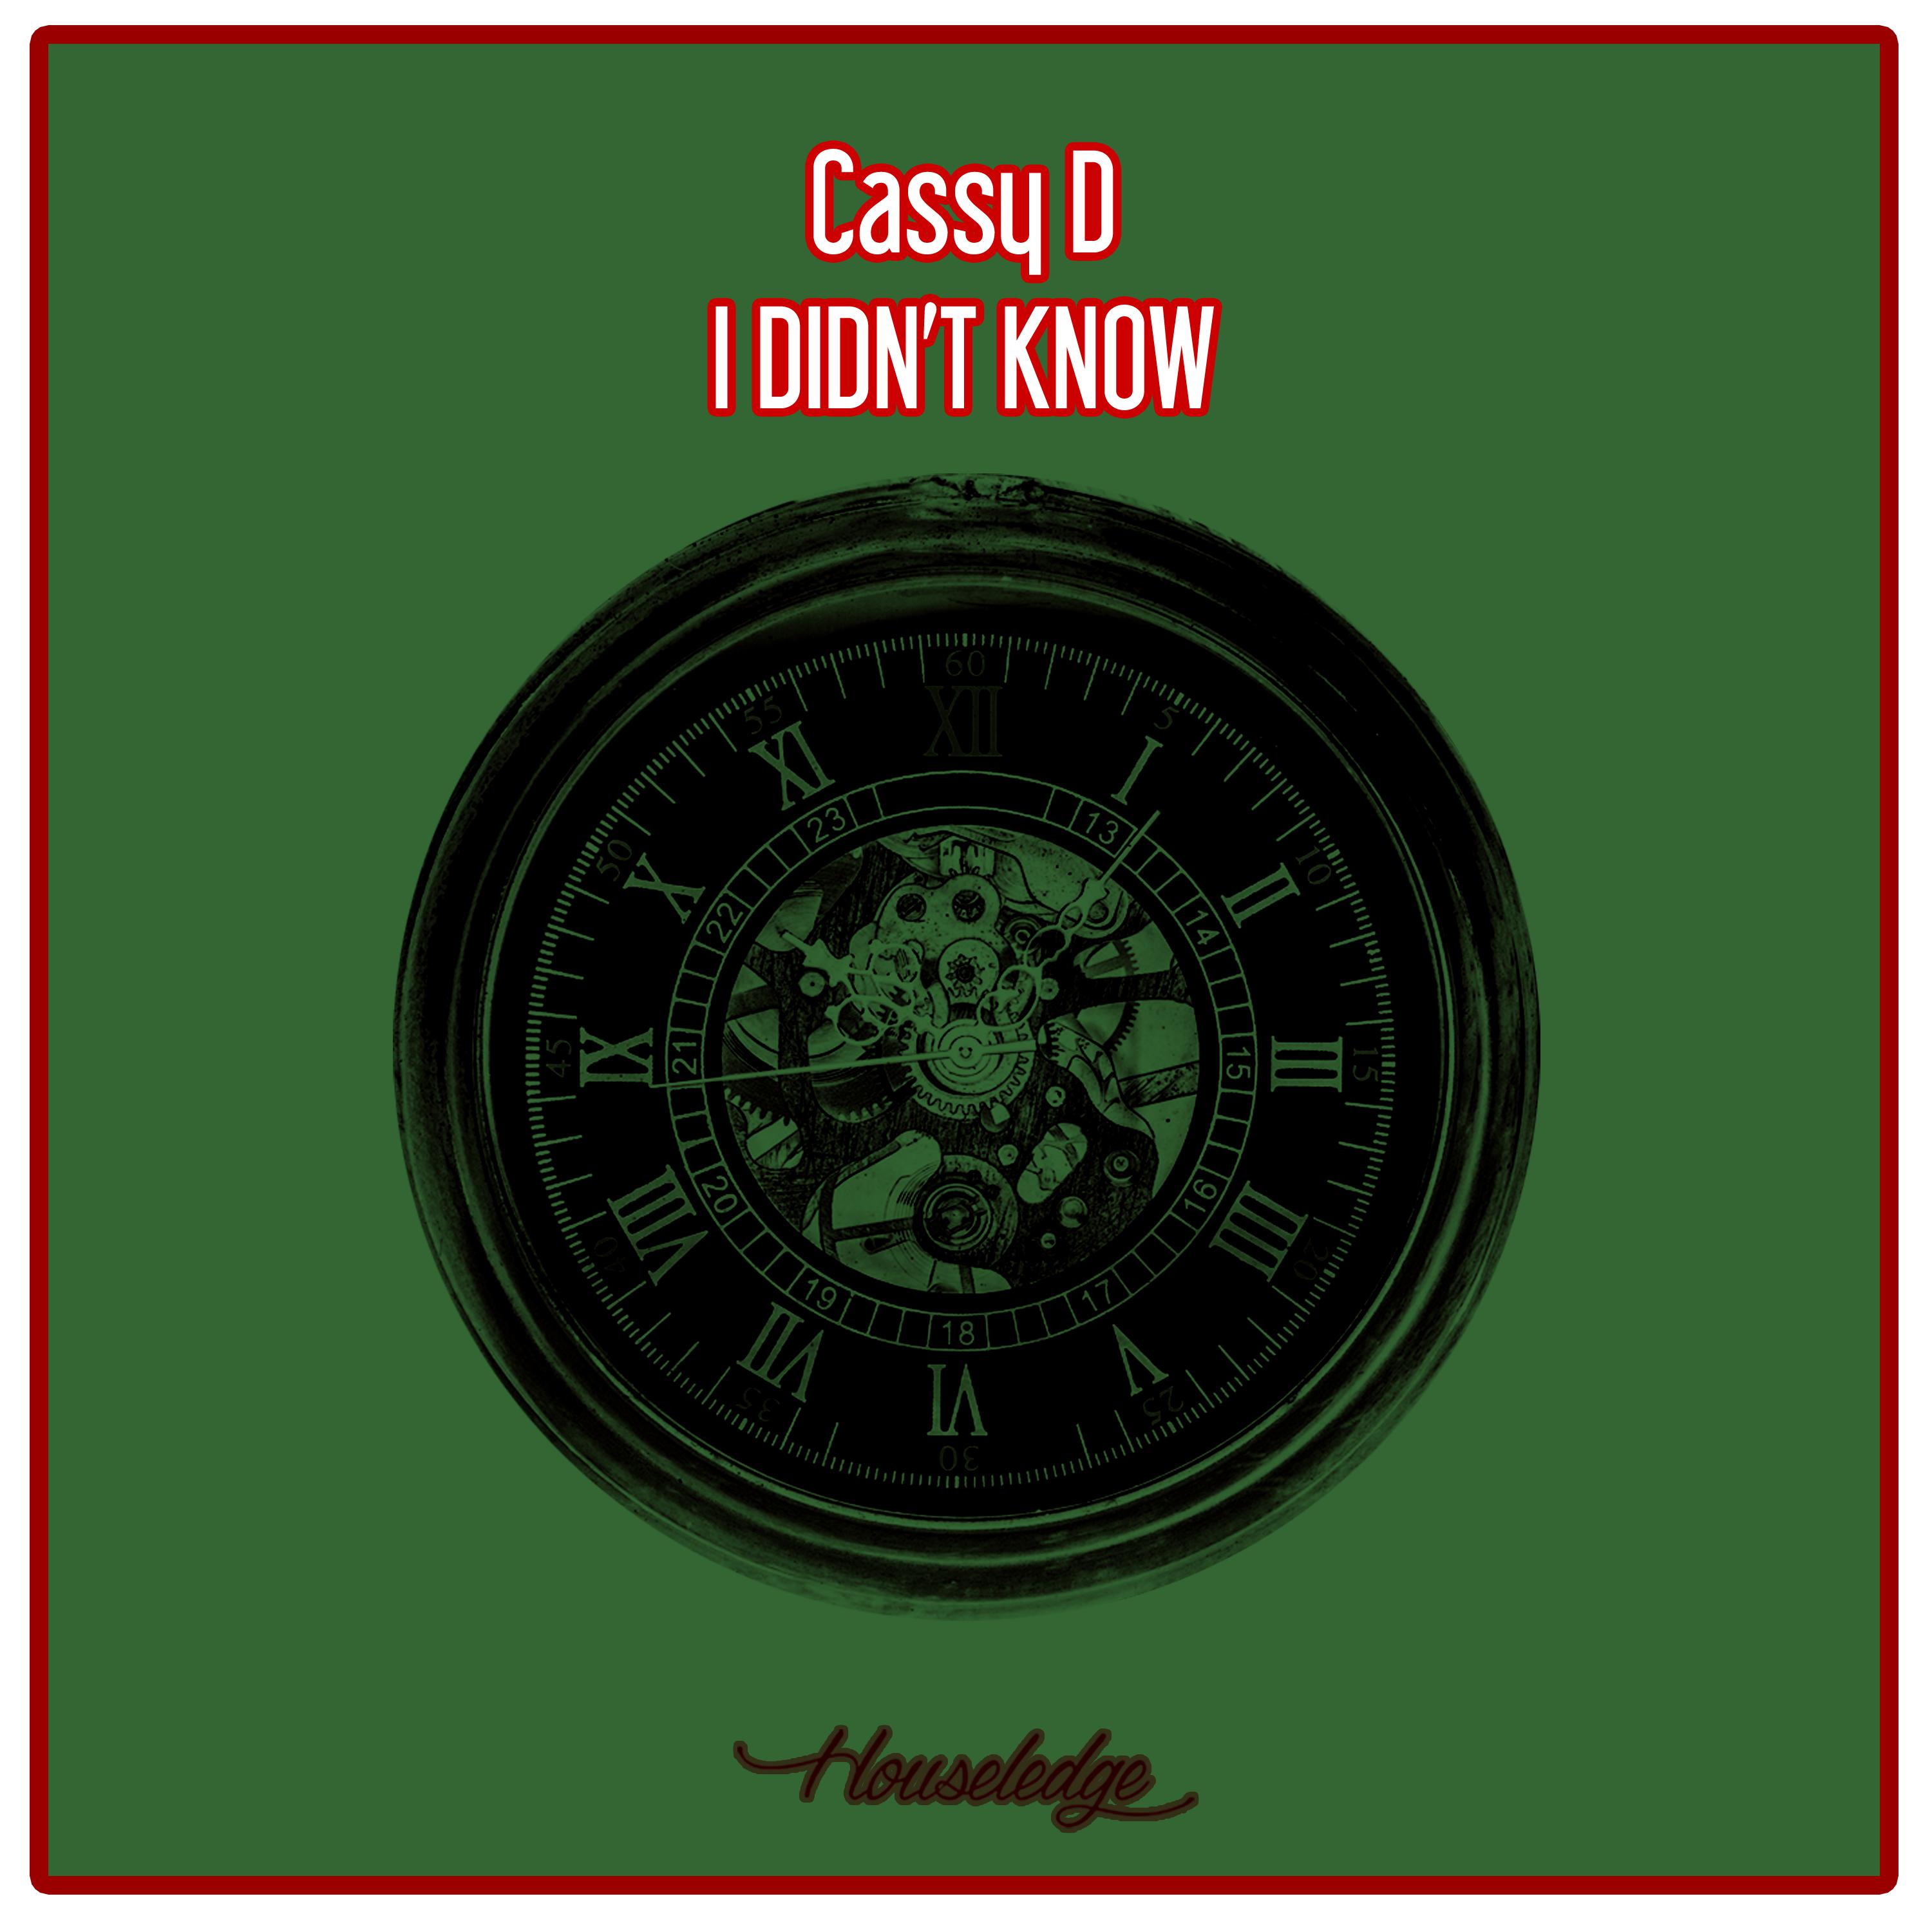 Cassy D - I Didn't Know (Nu Ground Foundation Reprise)